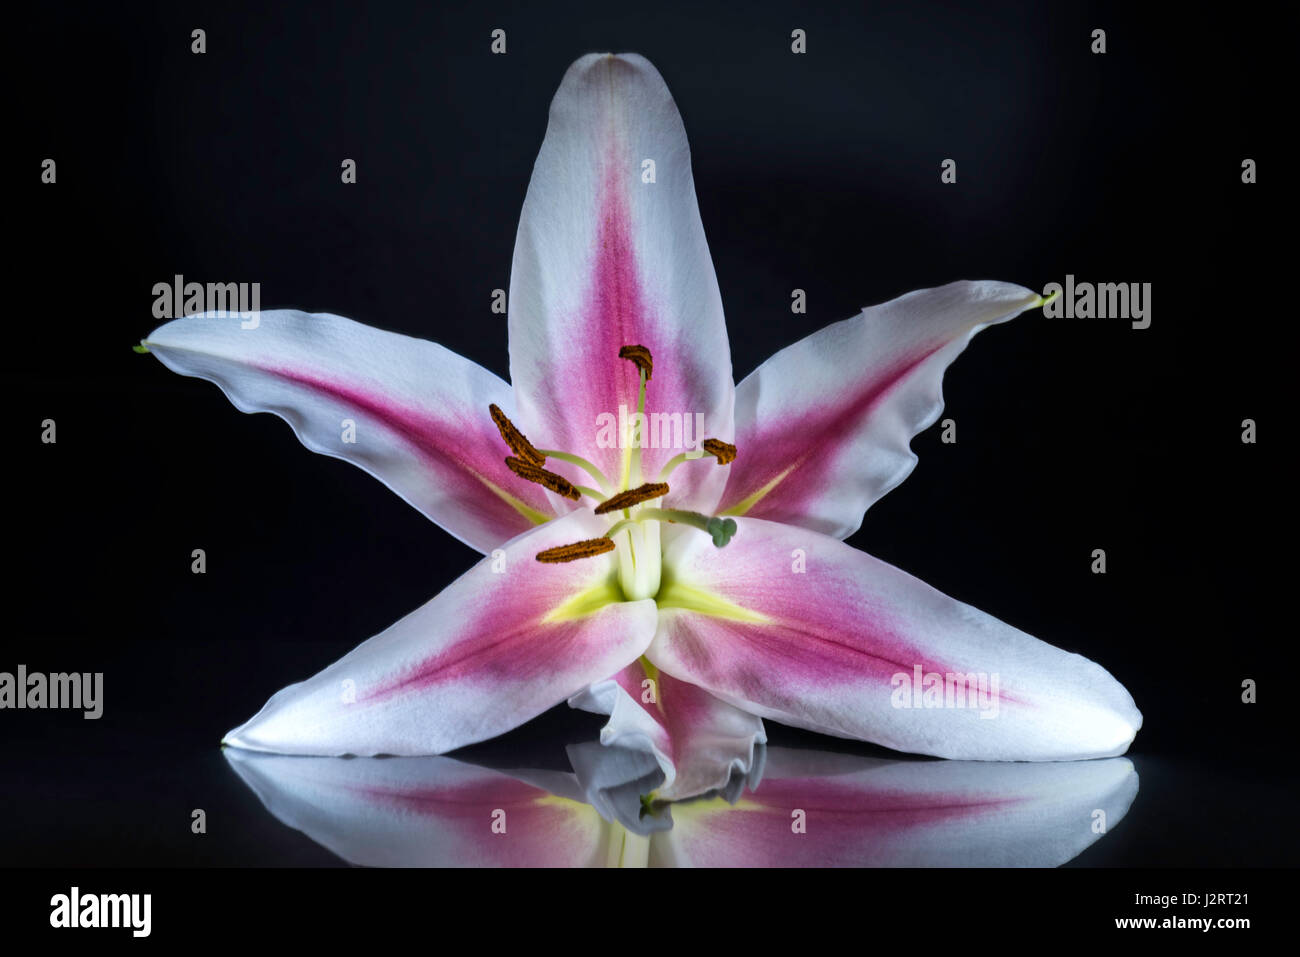 Pink striped Lily Flower emphasizing the beautiful form and structure of the carpel and stamen with petals back lit. Isolated against black background Stock Photo